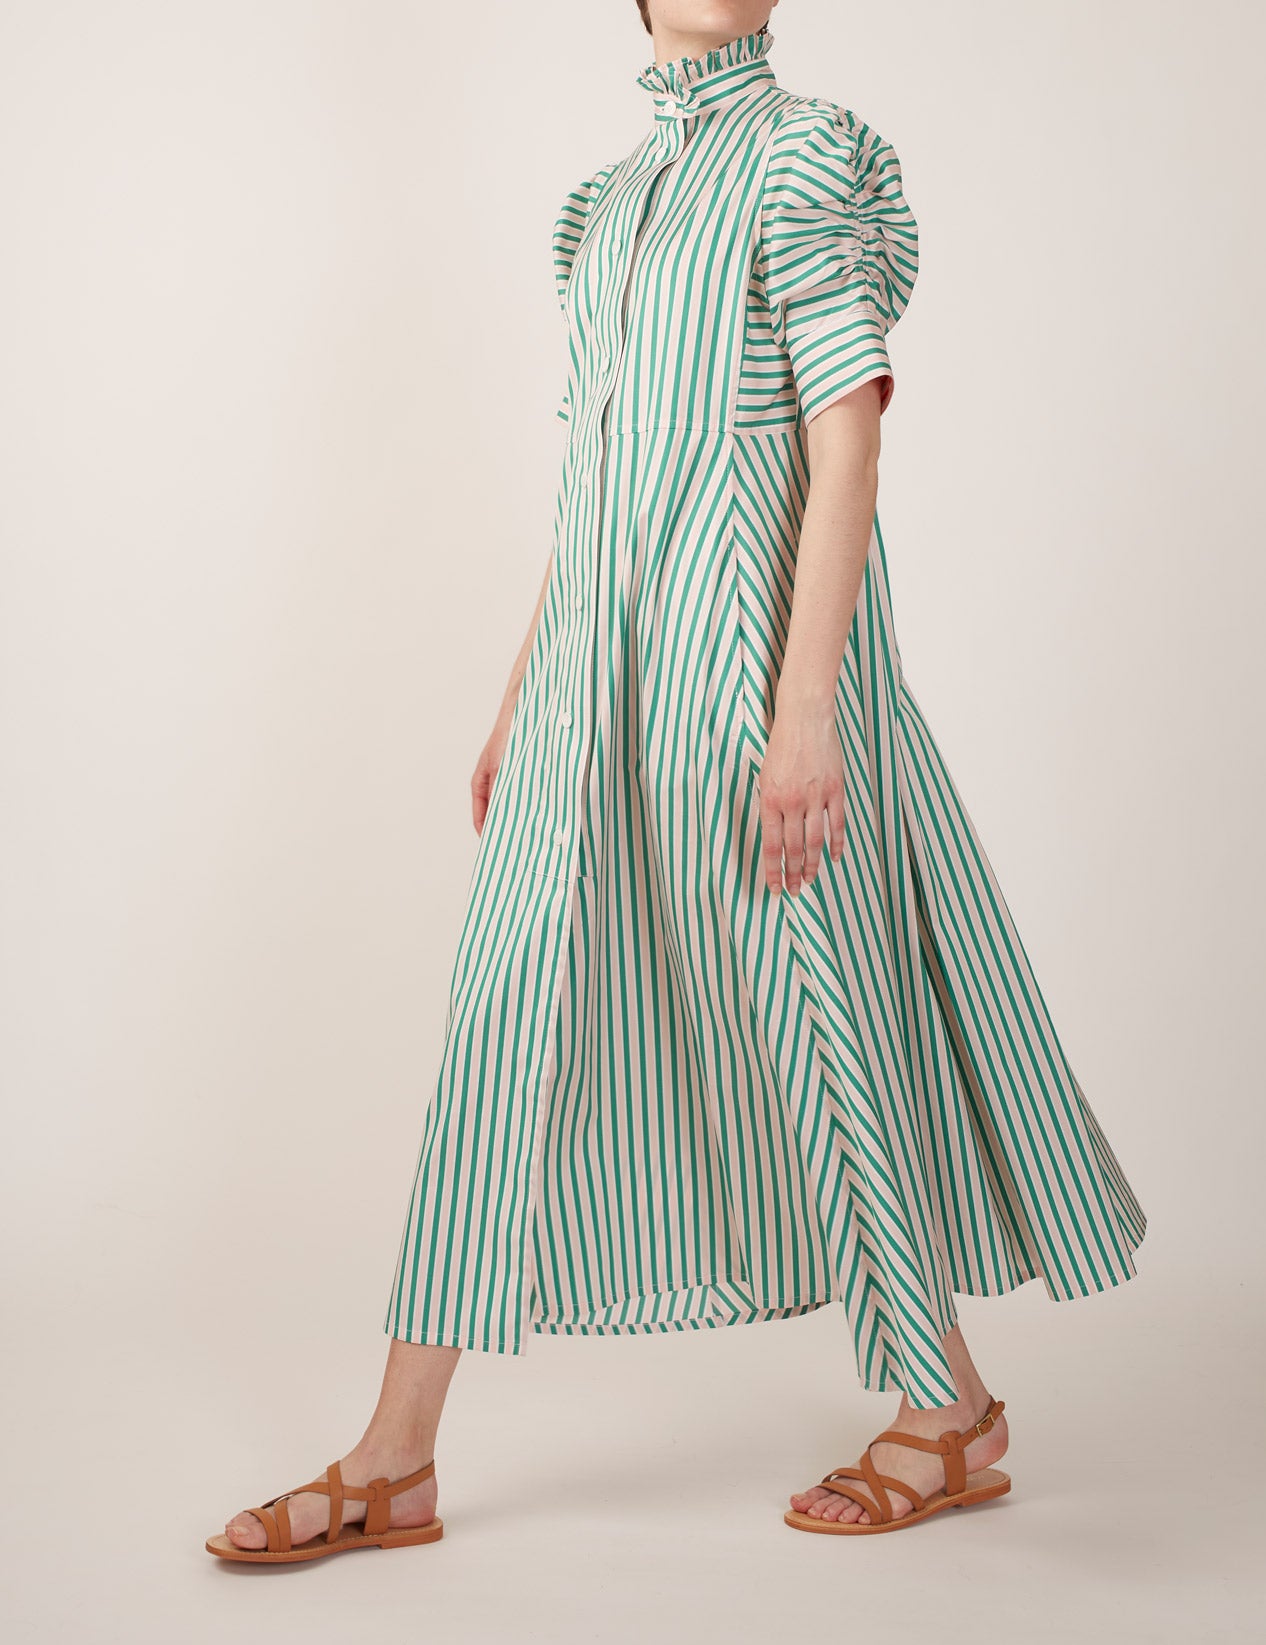 Venetia Mayfair Green/Salmon/White Dress by Thierry Colson, the perfect dress for summer